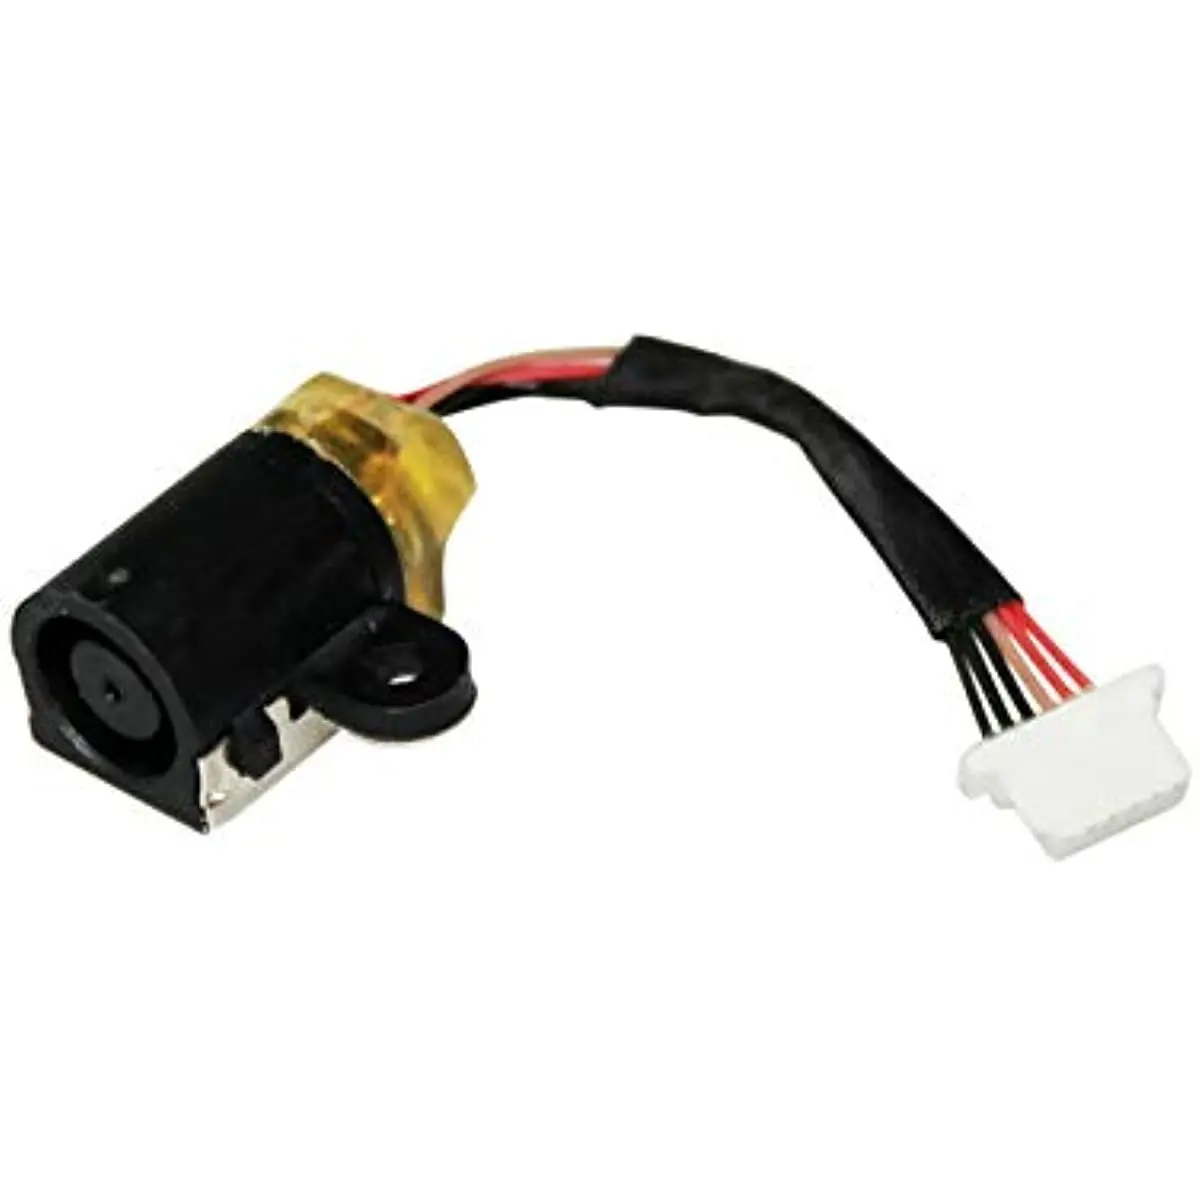 

DC Power Jack with Cable Socket Plug Replacement for HP EliteBook Folio 9470M 9480M 702875-001